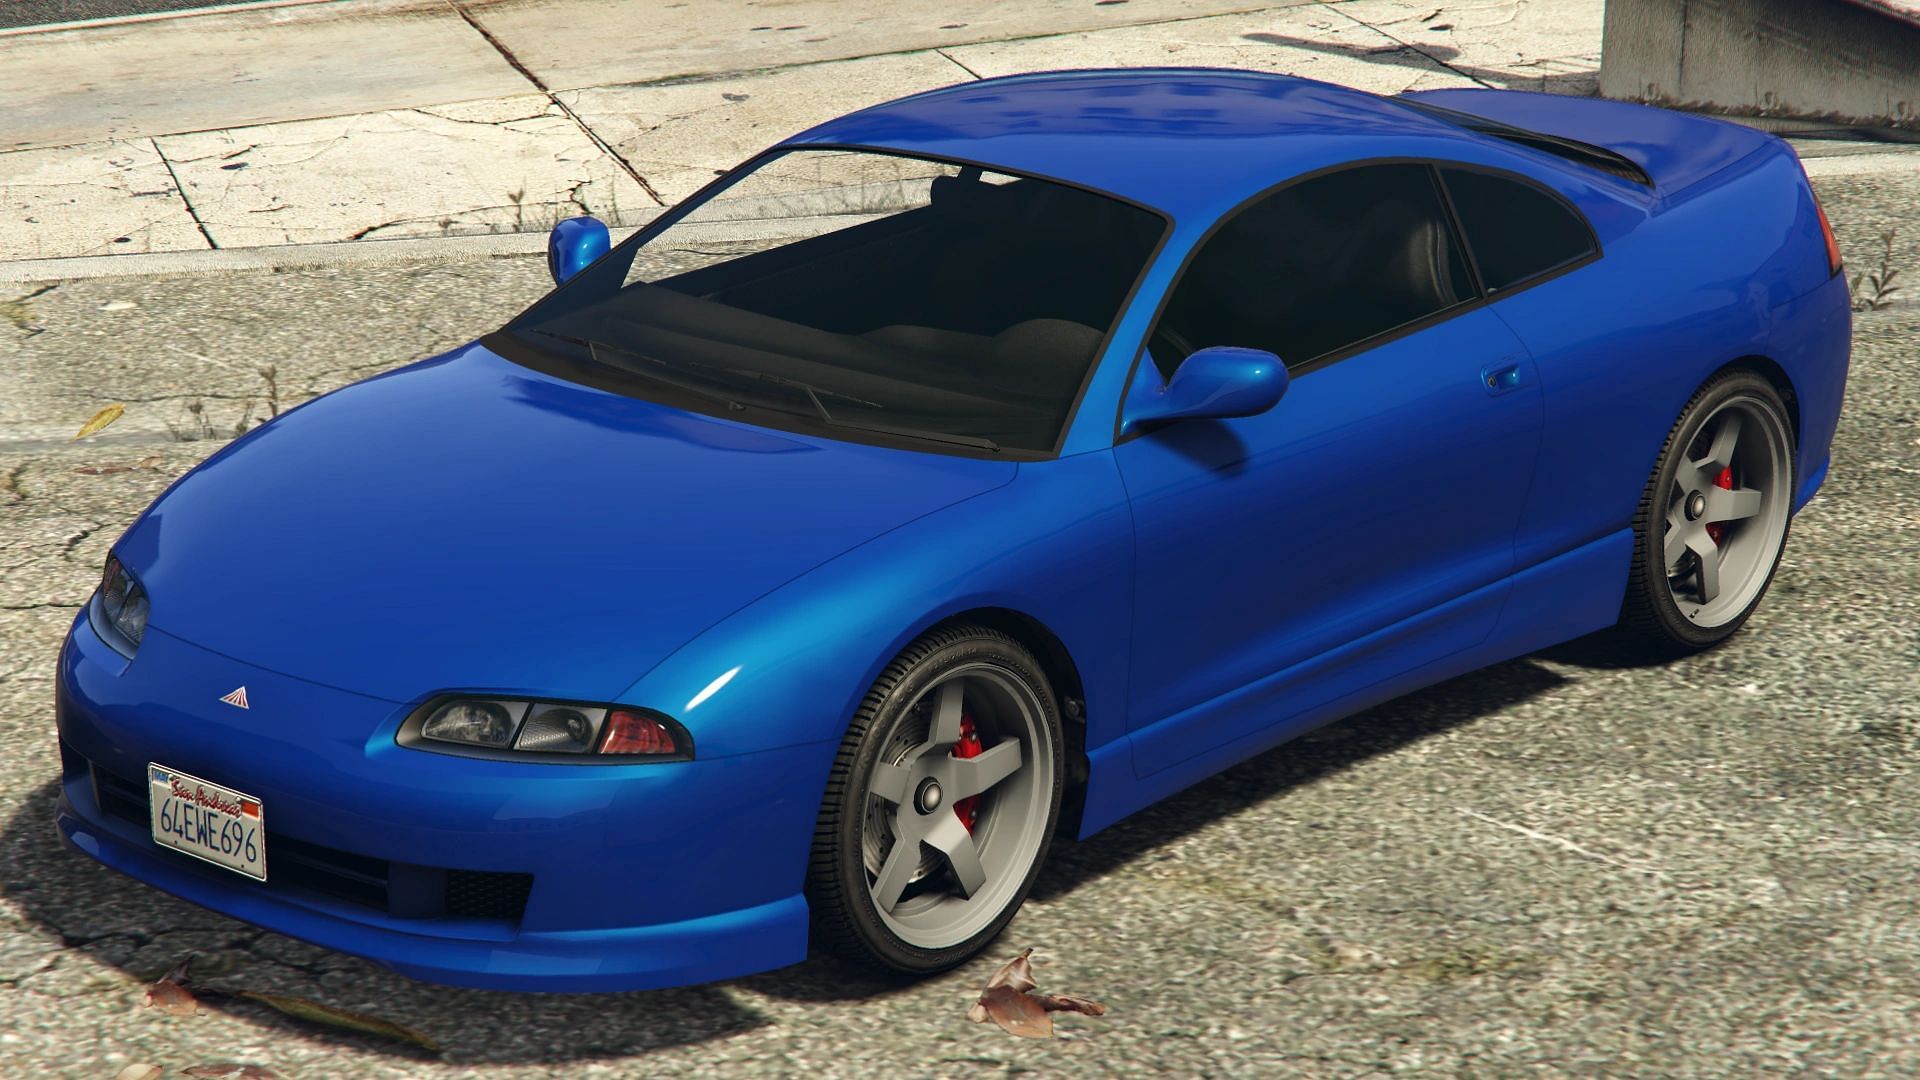 This is an amazing car in GTA Online (Image via Rockstar Games || GTA Wiki/Noirlime4L)